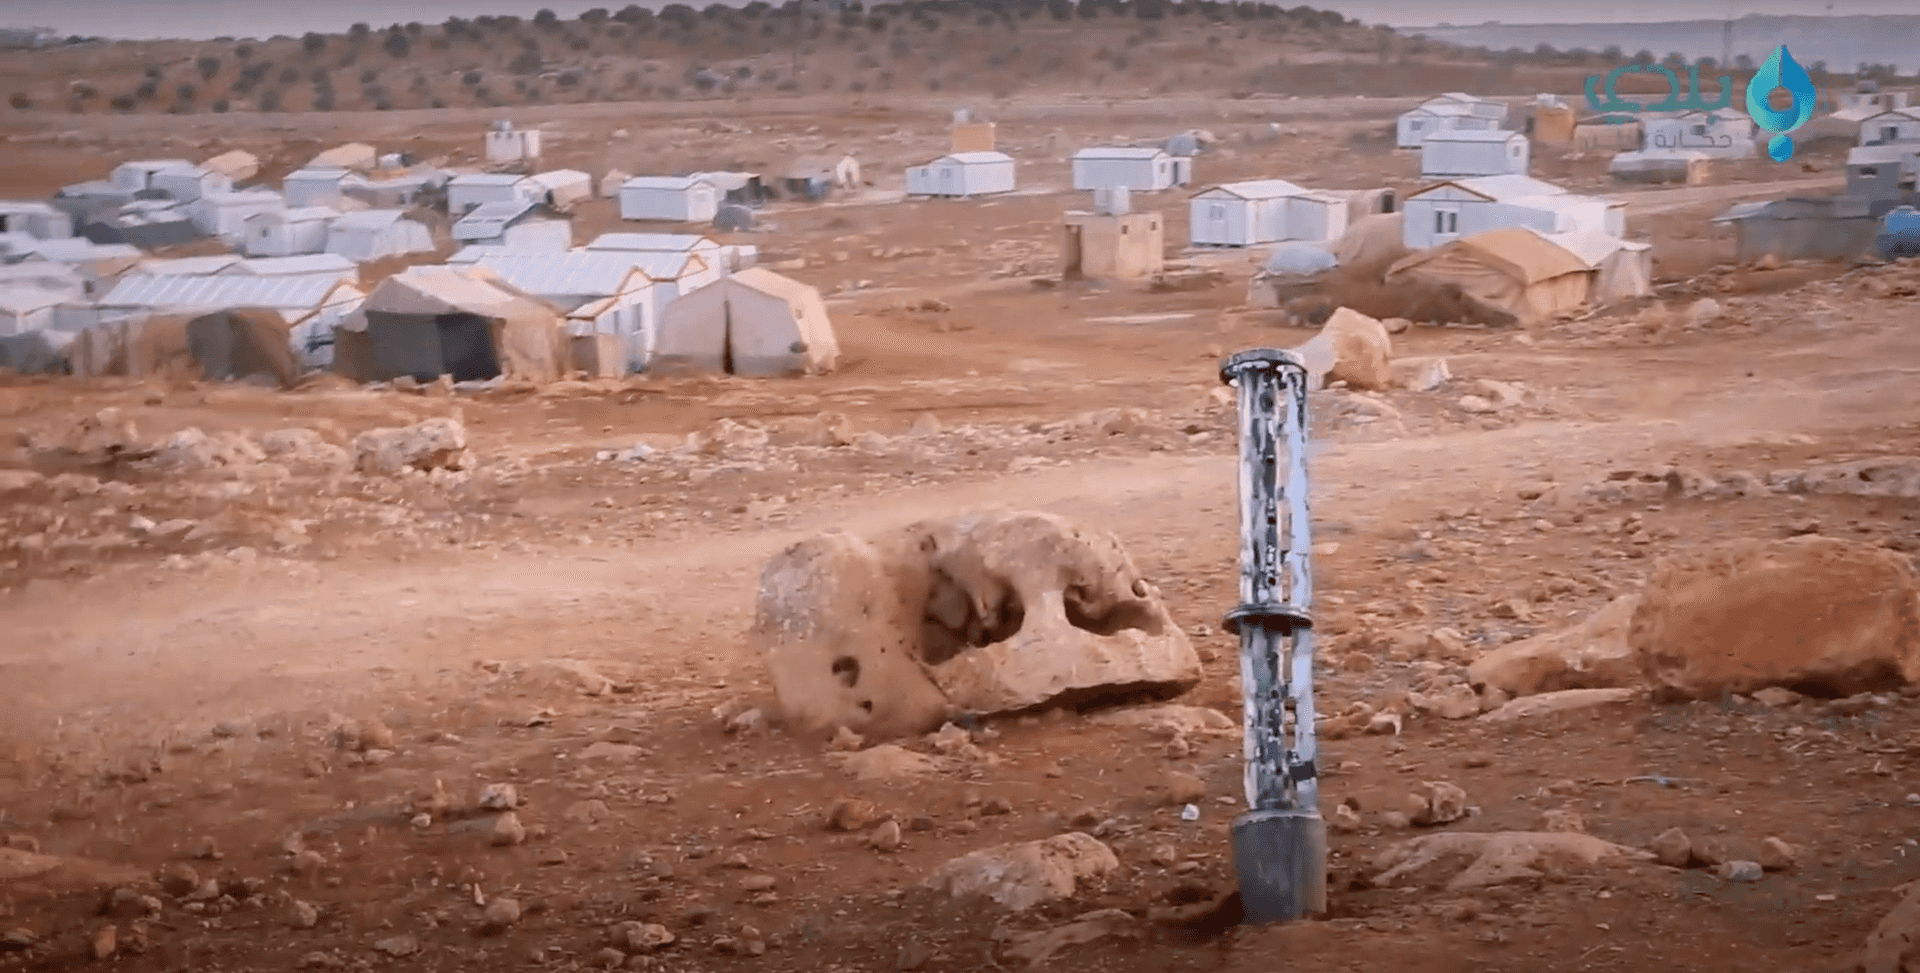 Attacks on six internally displaced persons (IDP) camps in the Idlib countryside